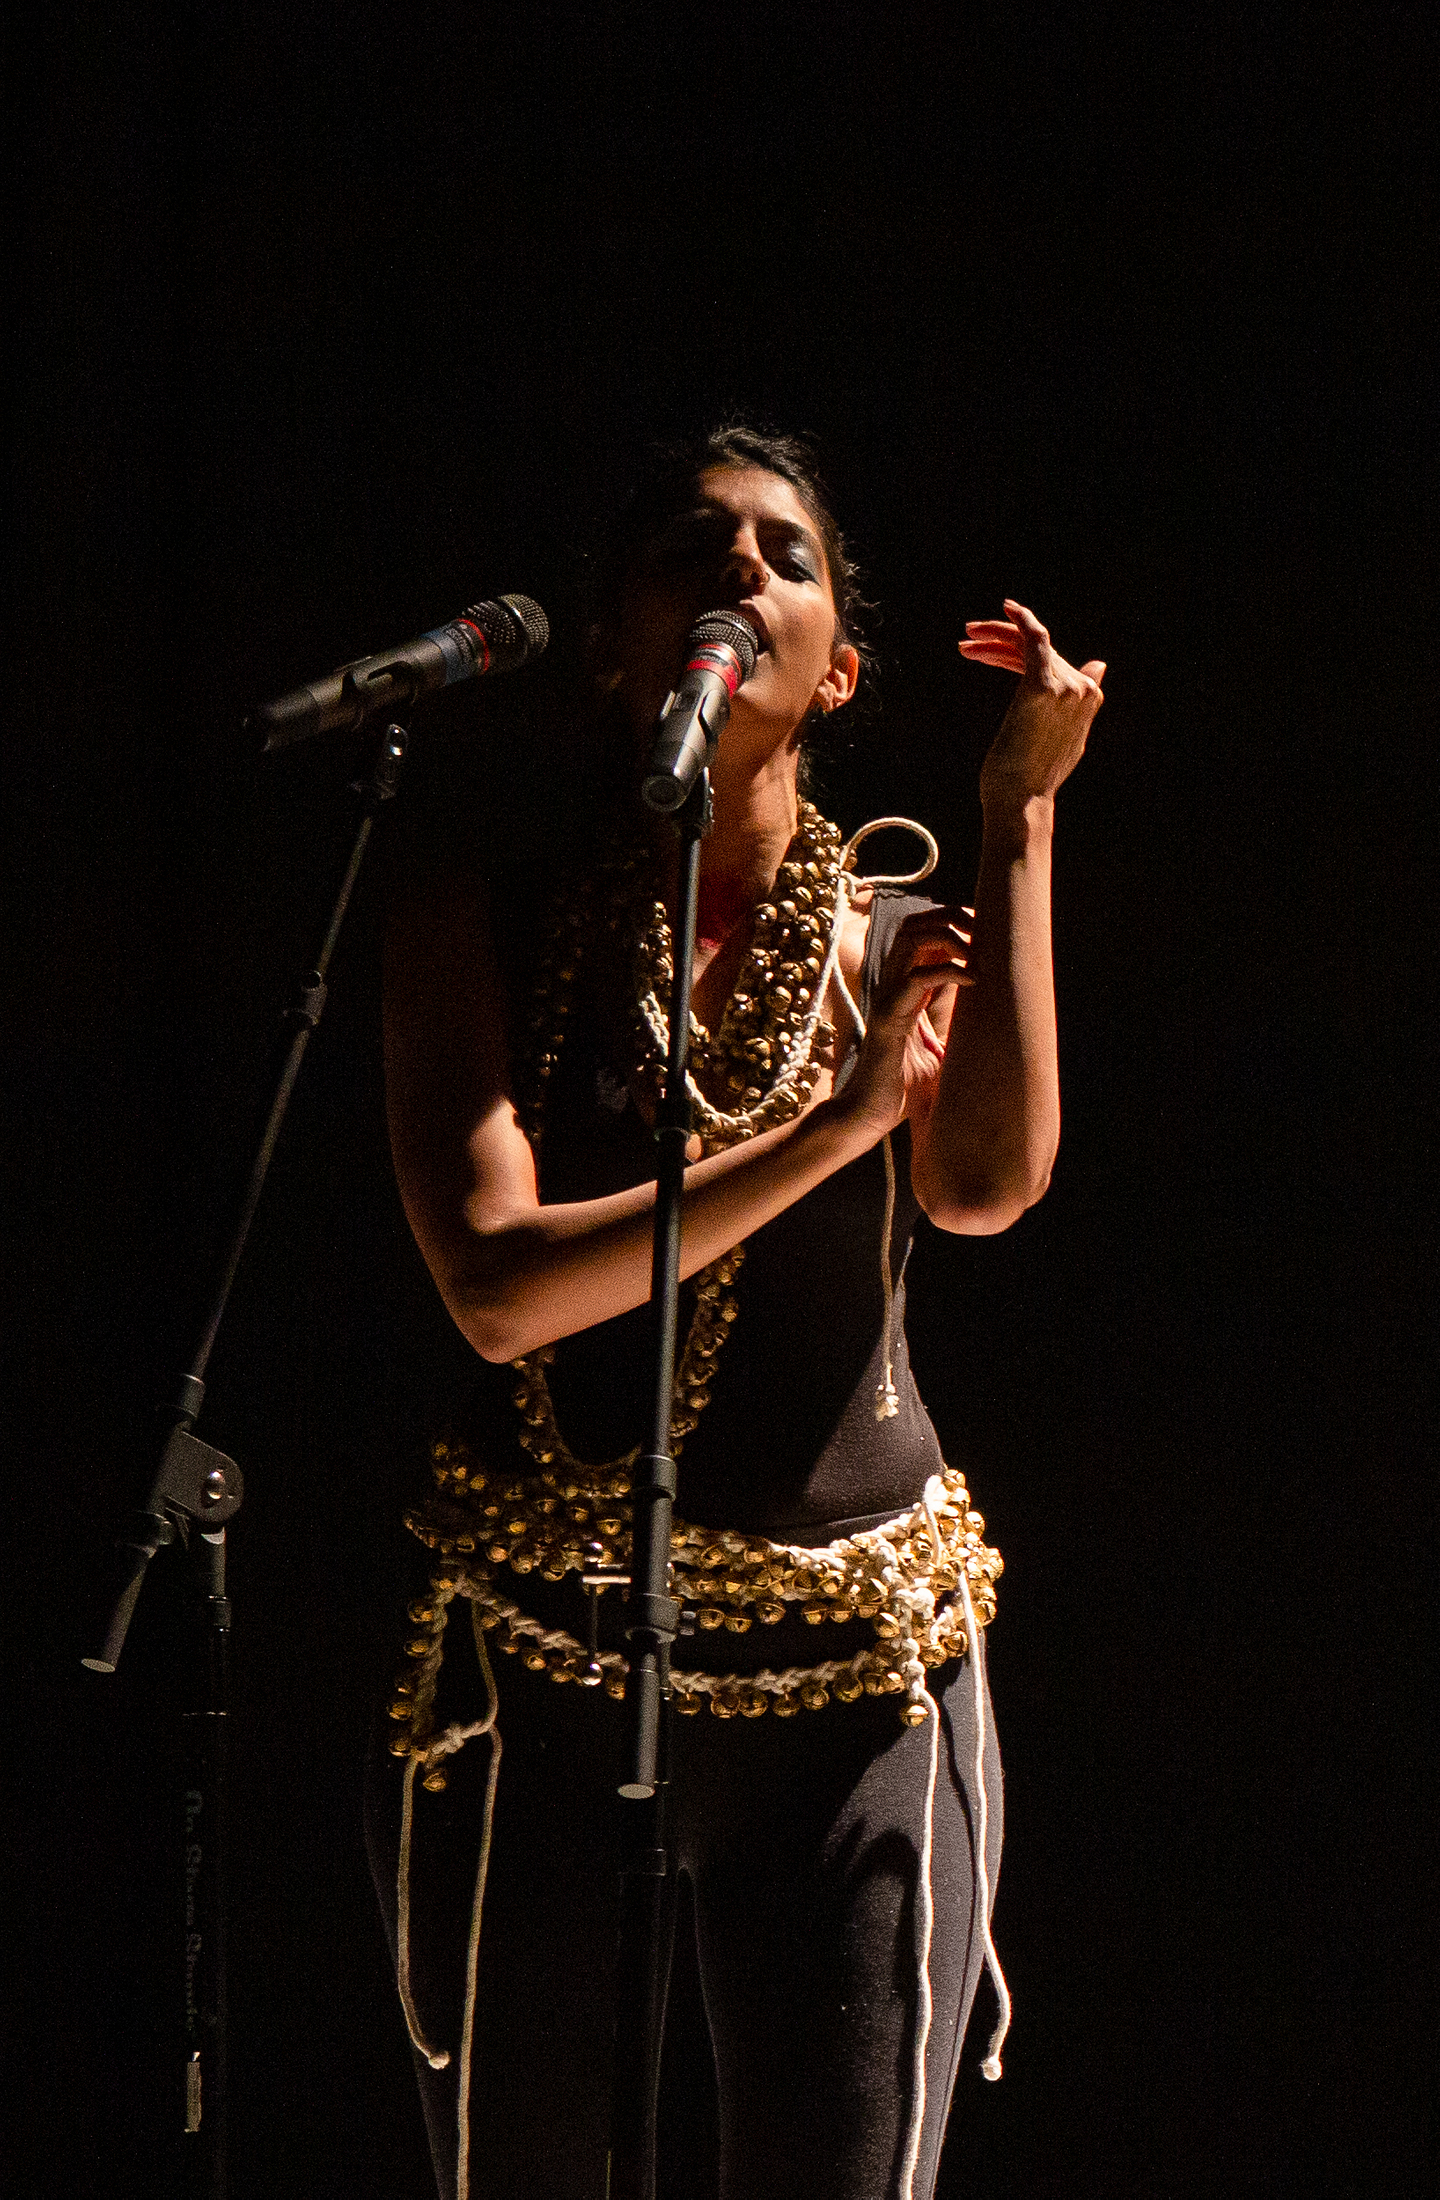 Samita Sinha sings into a microphone. She is wearing a black singlet and tights, and ropes of small bells around her neck and hips.